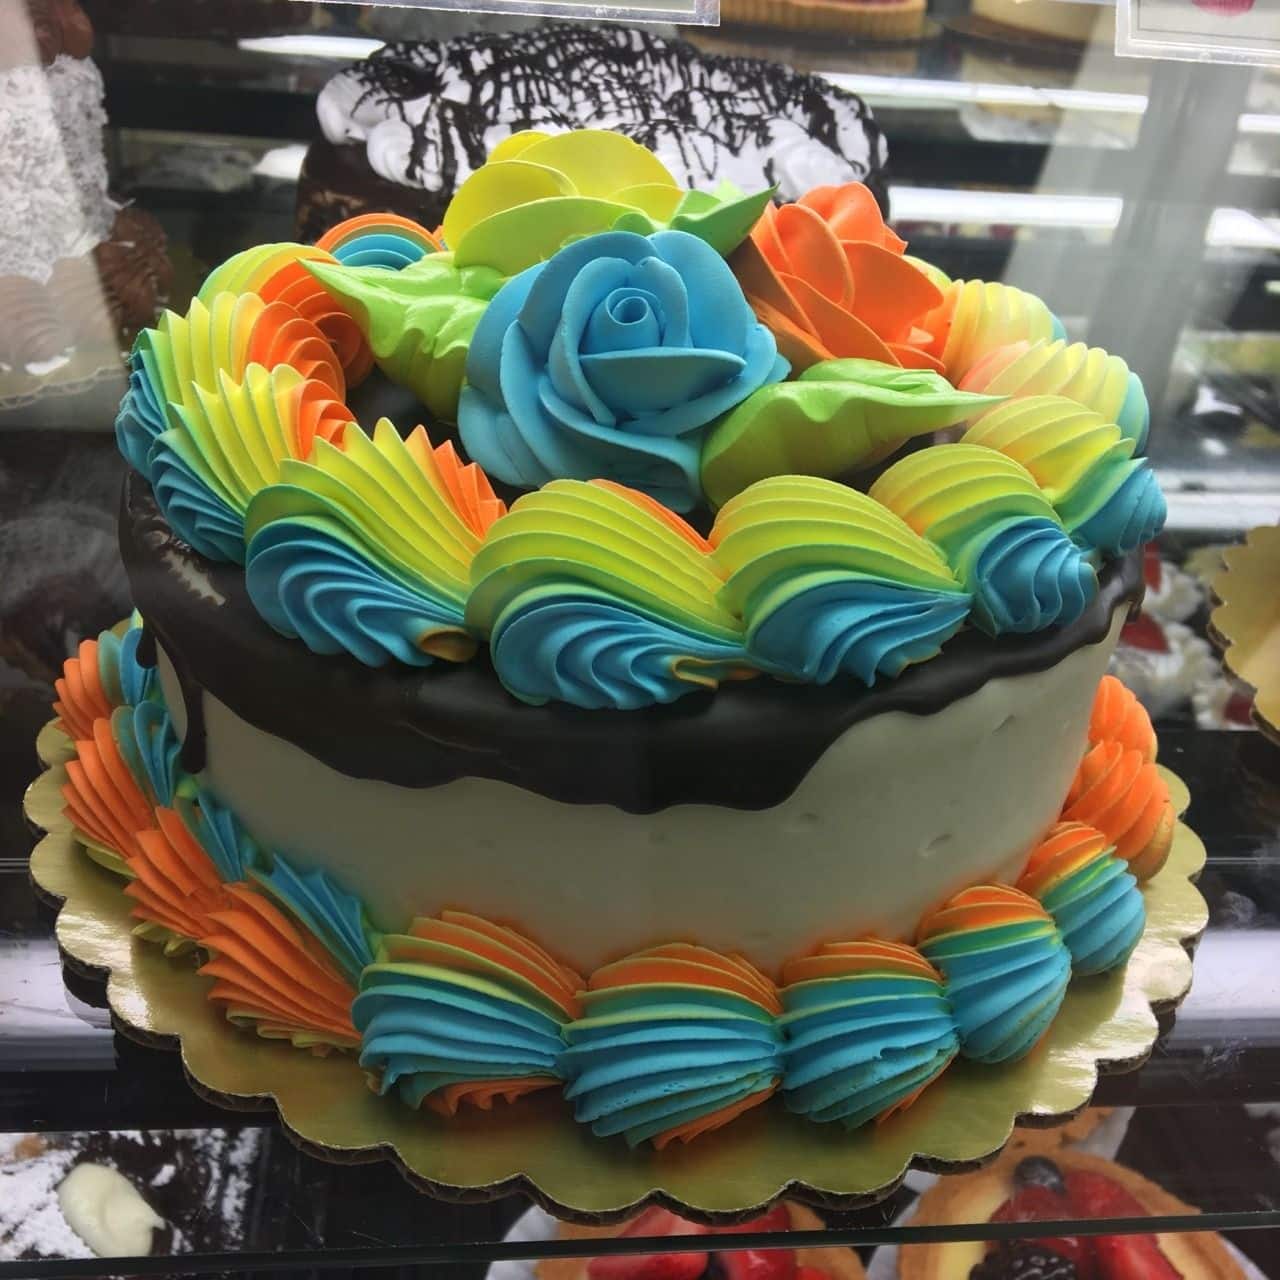 Pictures Of Cakes From Grocery Stores